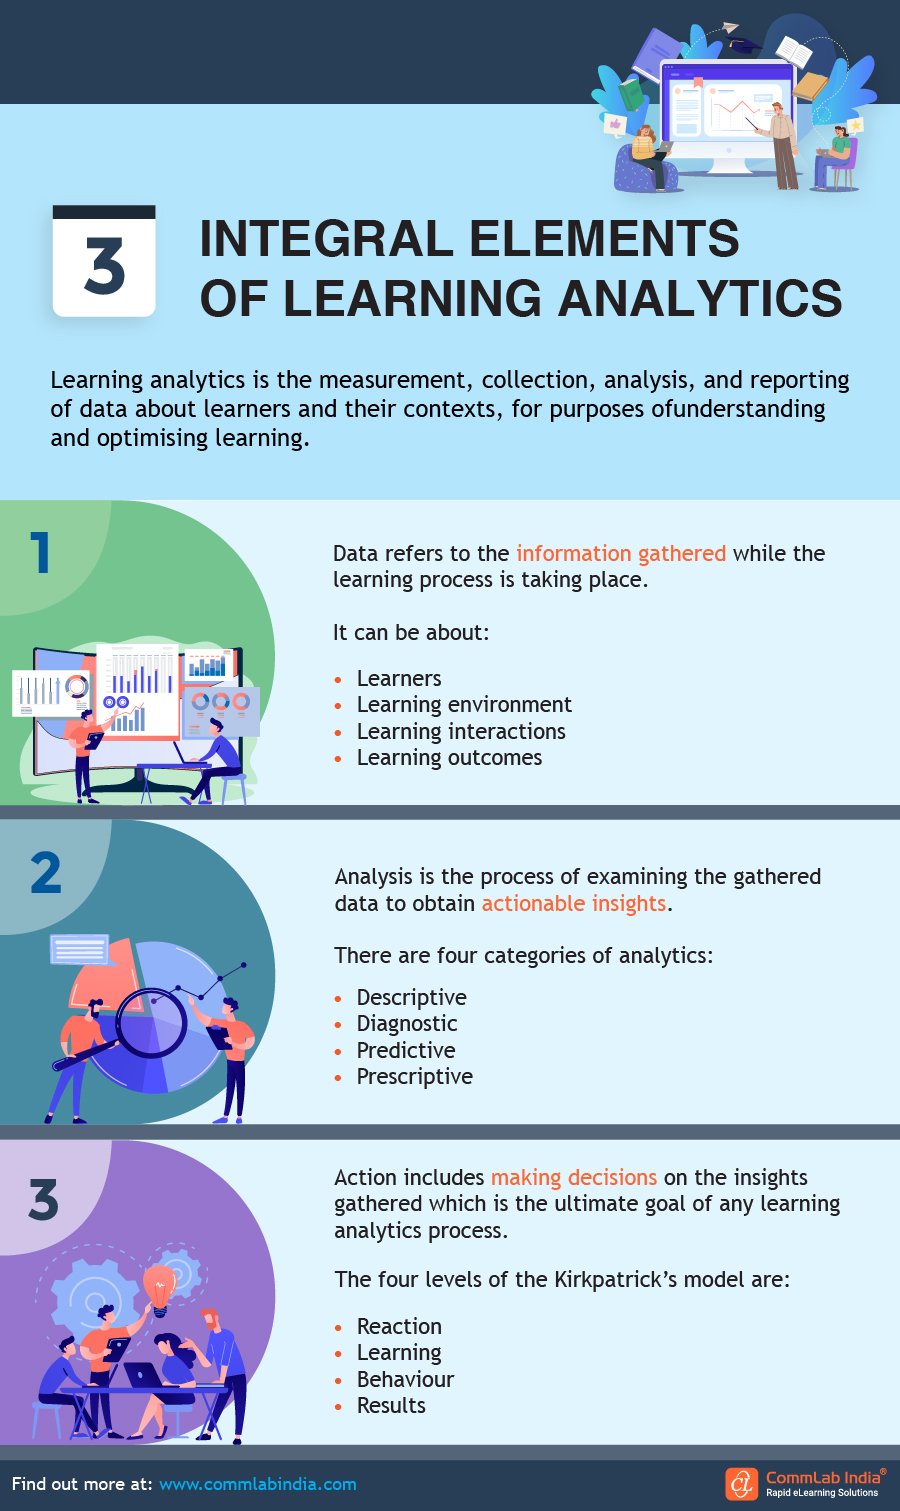 Integral Elements of Learning Analytics